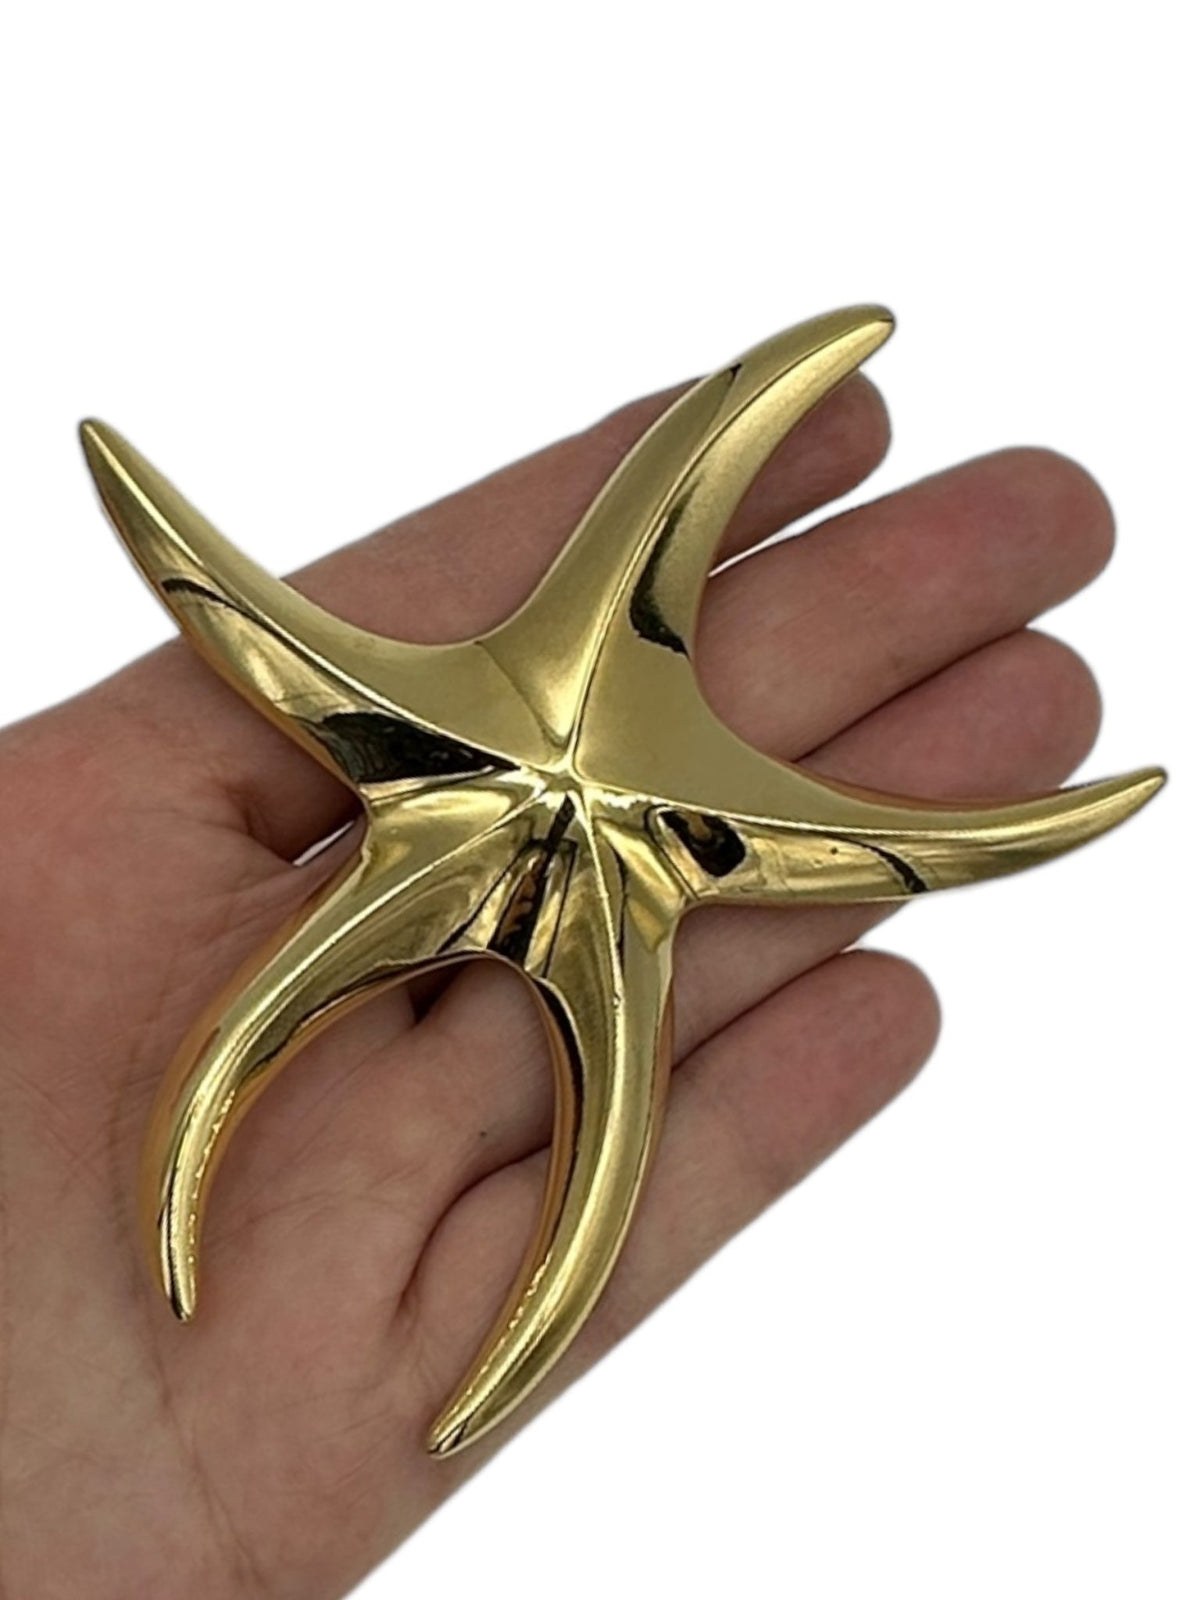 Monet Vintage Jewelry Classic Gold Oversized Starfish Brooch - 24 Wishes Vintage Jewelry